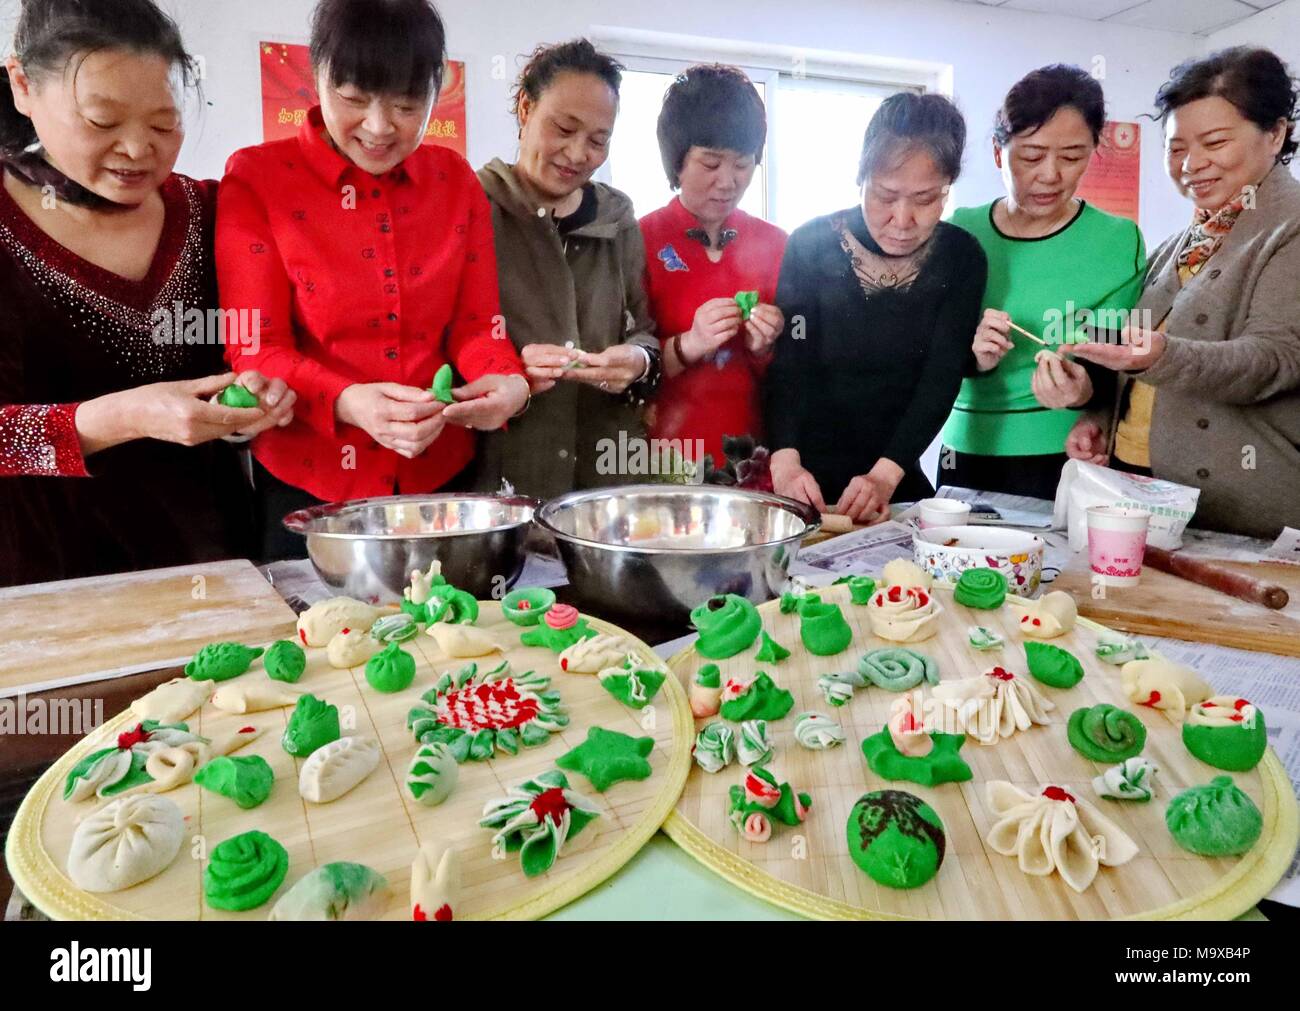 Qinhuangdao, Qinhuangdao, China. 29th Mar, 2018. Qinhuangdao, CHINA-29th March 2018: People make traditional food to celebrate Cold Food Festival in Qinhuangdao, north China's Hebei Province. The Cold Food or Hanshi Festival is a traditional Chinese holiday which developed from the local commemoration of the death of the Jin nobleman Jie Zhitui in the 7th century BC under the Zhou into an East Asian occasion for the commemoration and veneration of ancestors by the 7th-century Tang. The lighting of fire was avoided, even for the preparation of food. This practice originally occurred at midwint Stock Photo